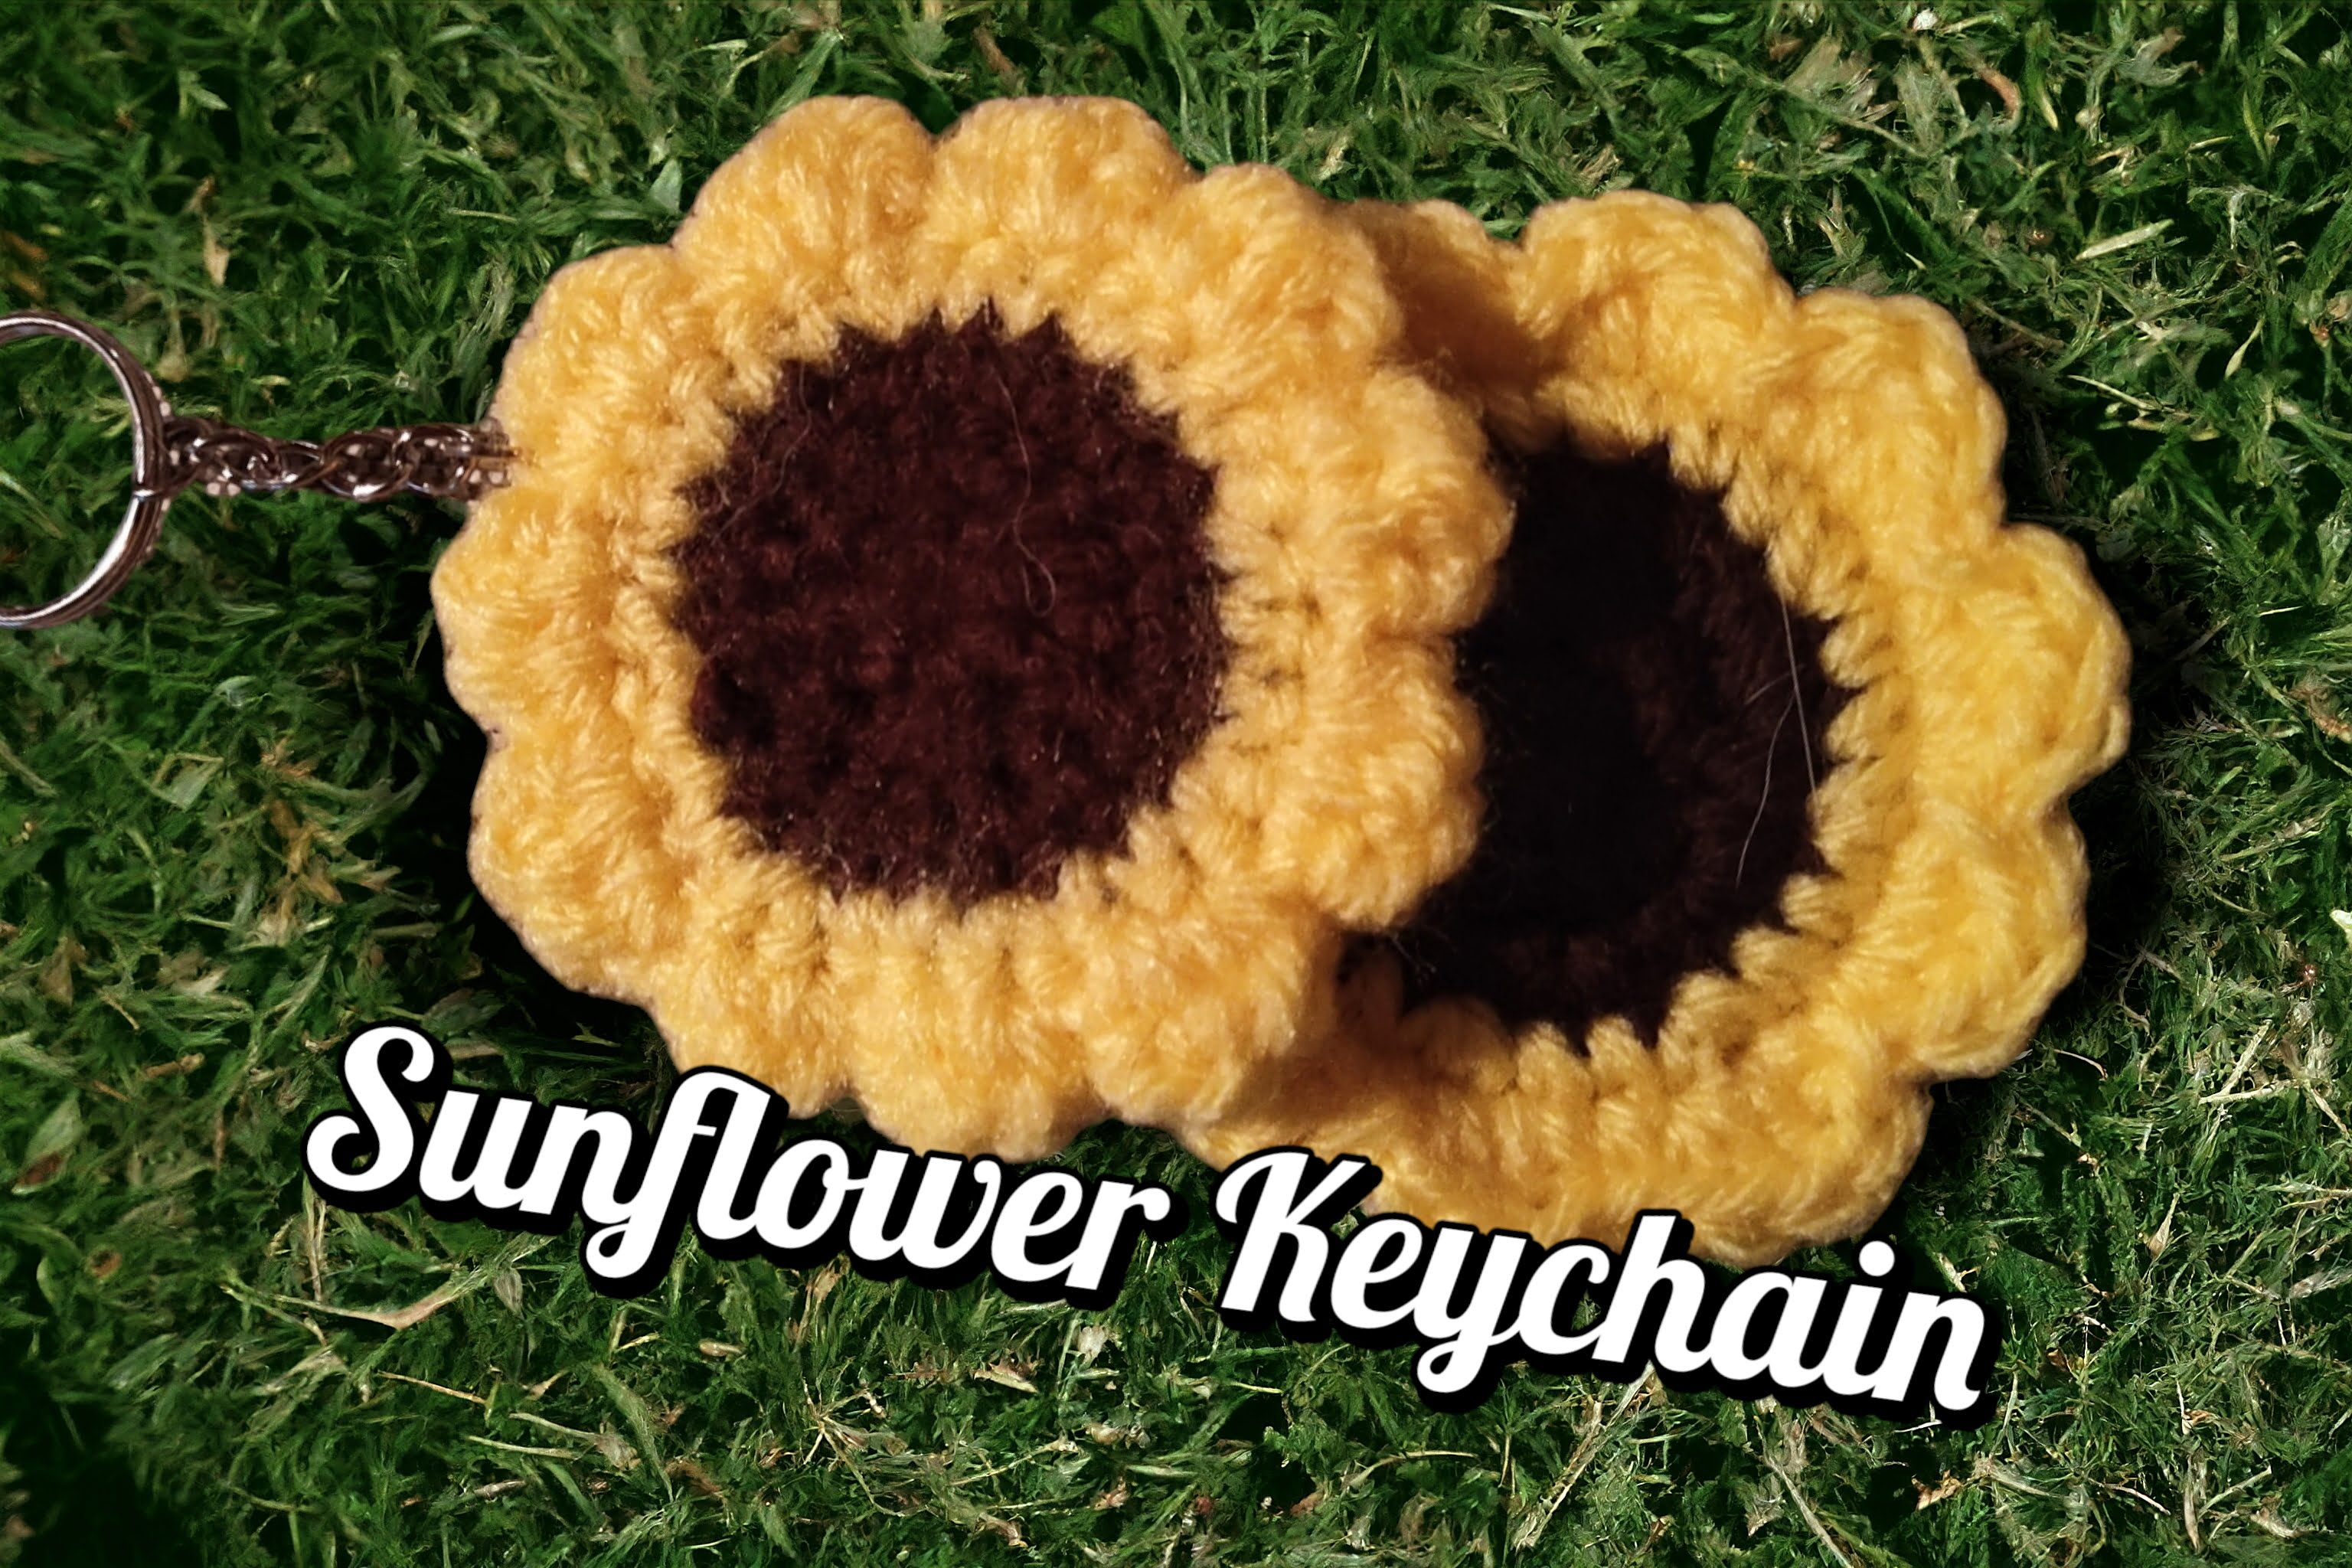 How to Make a Sunflower Keychain